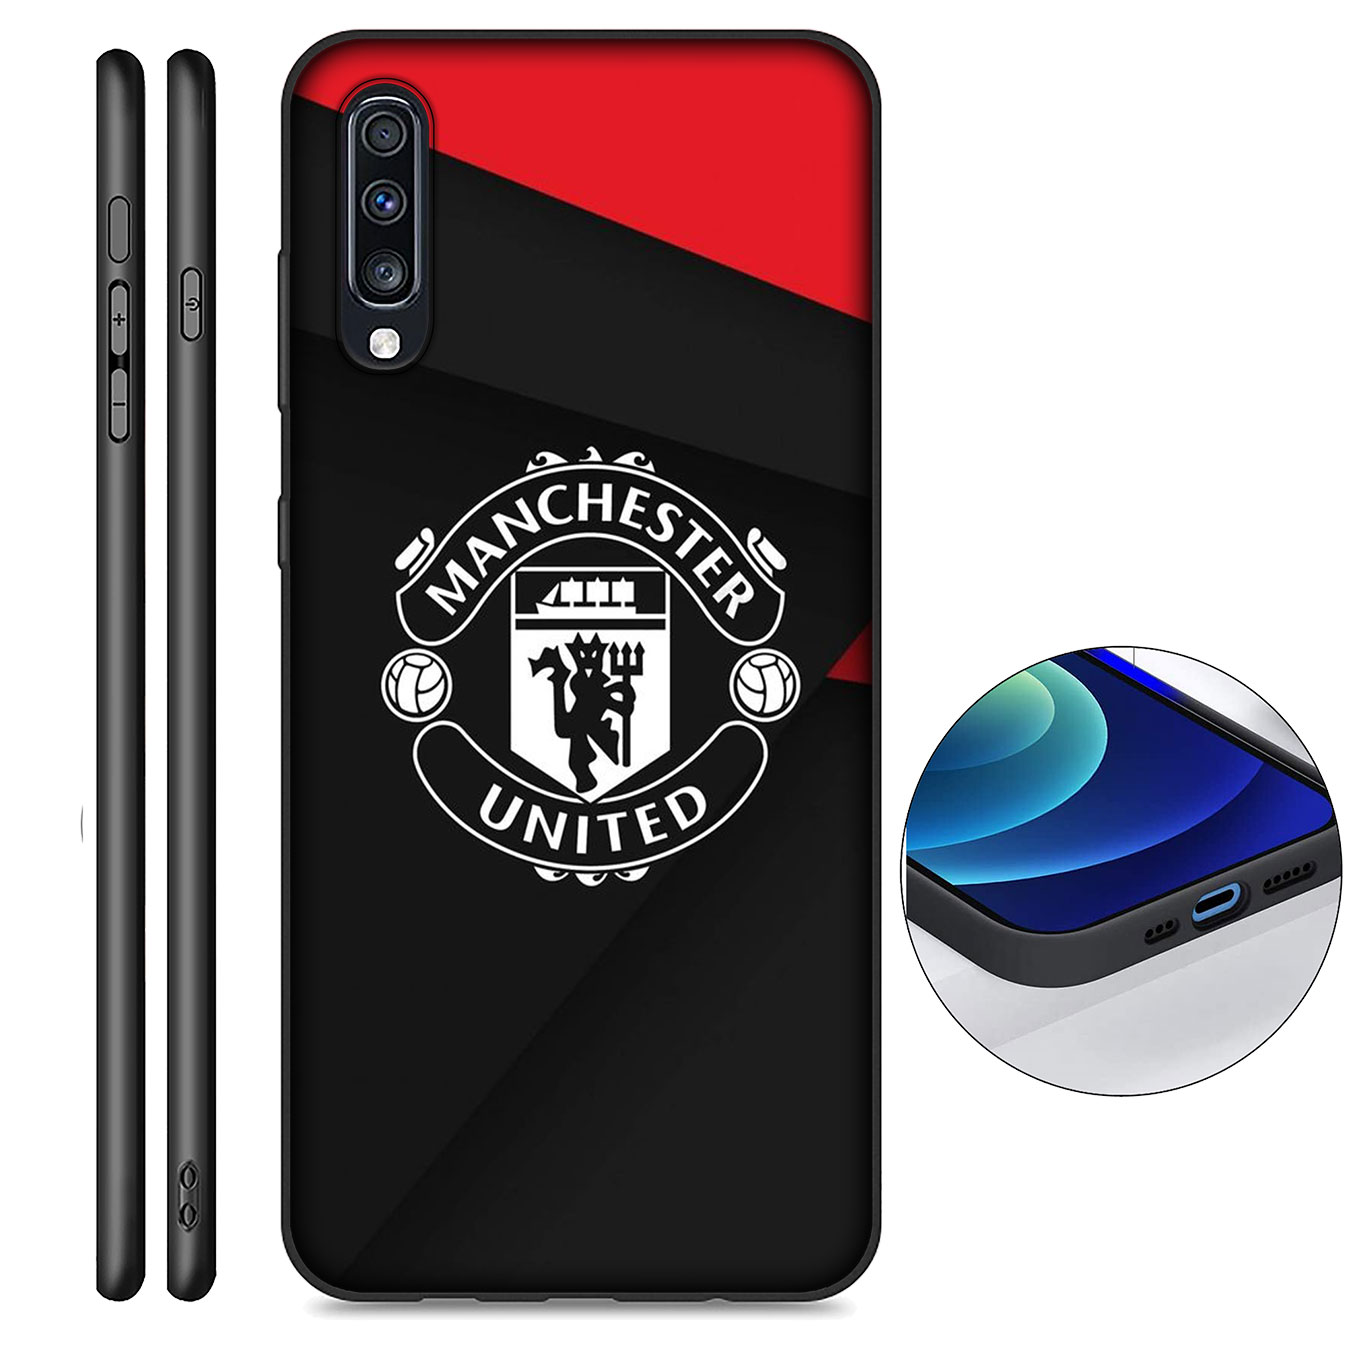 iPhone 12 Mini 11 Max Pro SE 2020 XR Phone Case Soft Silicone Casing Manchester United